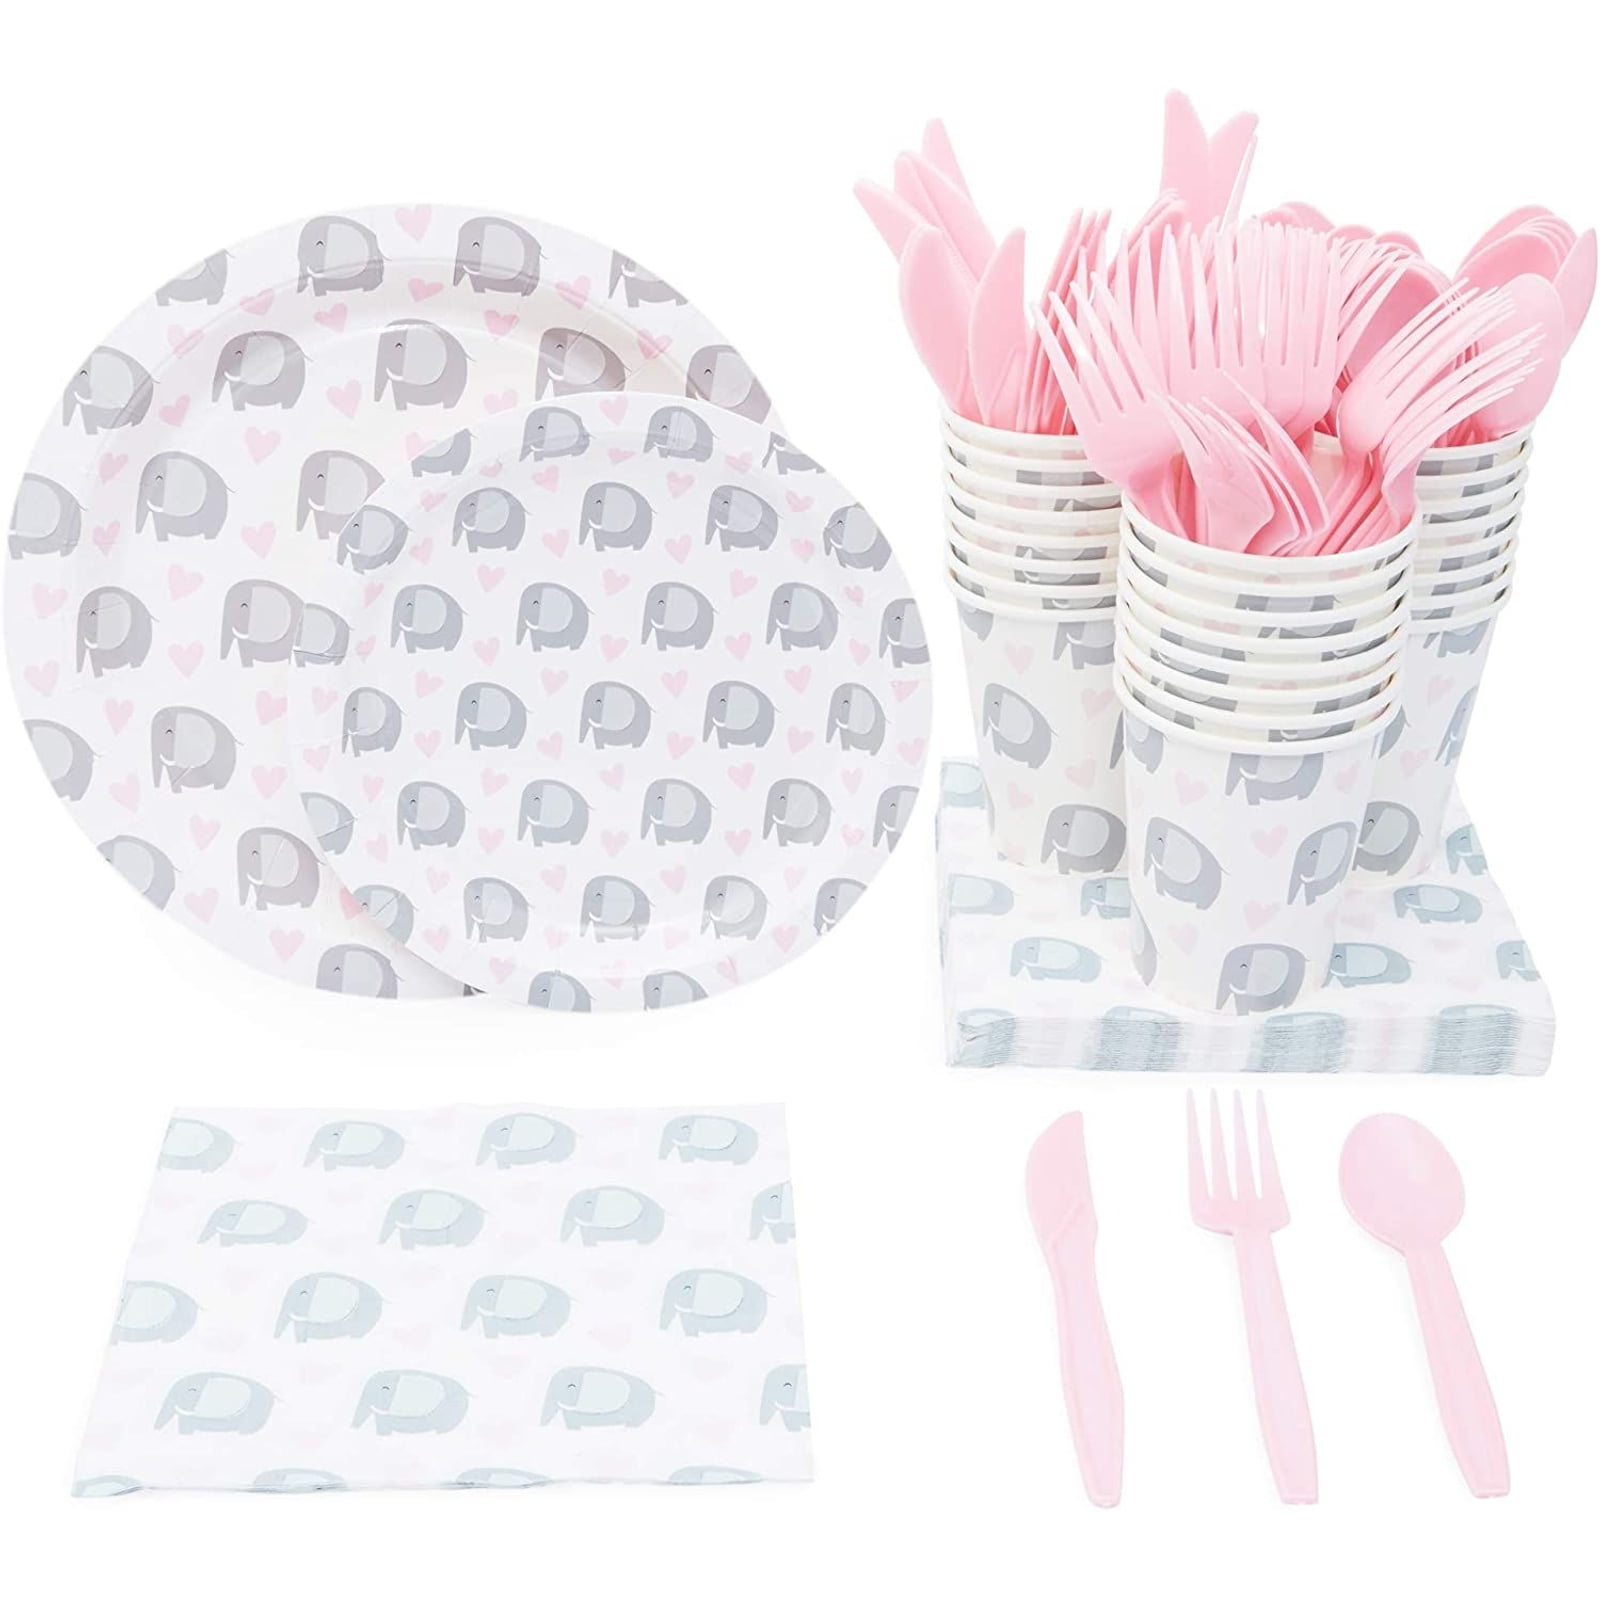 9 Plates Luncheon Napkins Cups and Table Cover with Birthday Candles Bundle for 16 Little Outrageous Littles Party Supplies Pack Serves 16 